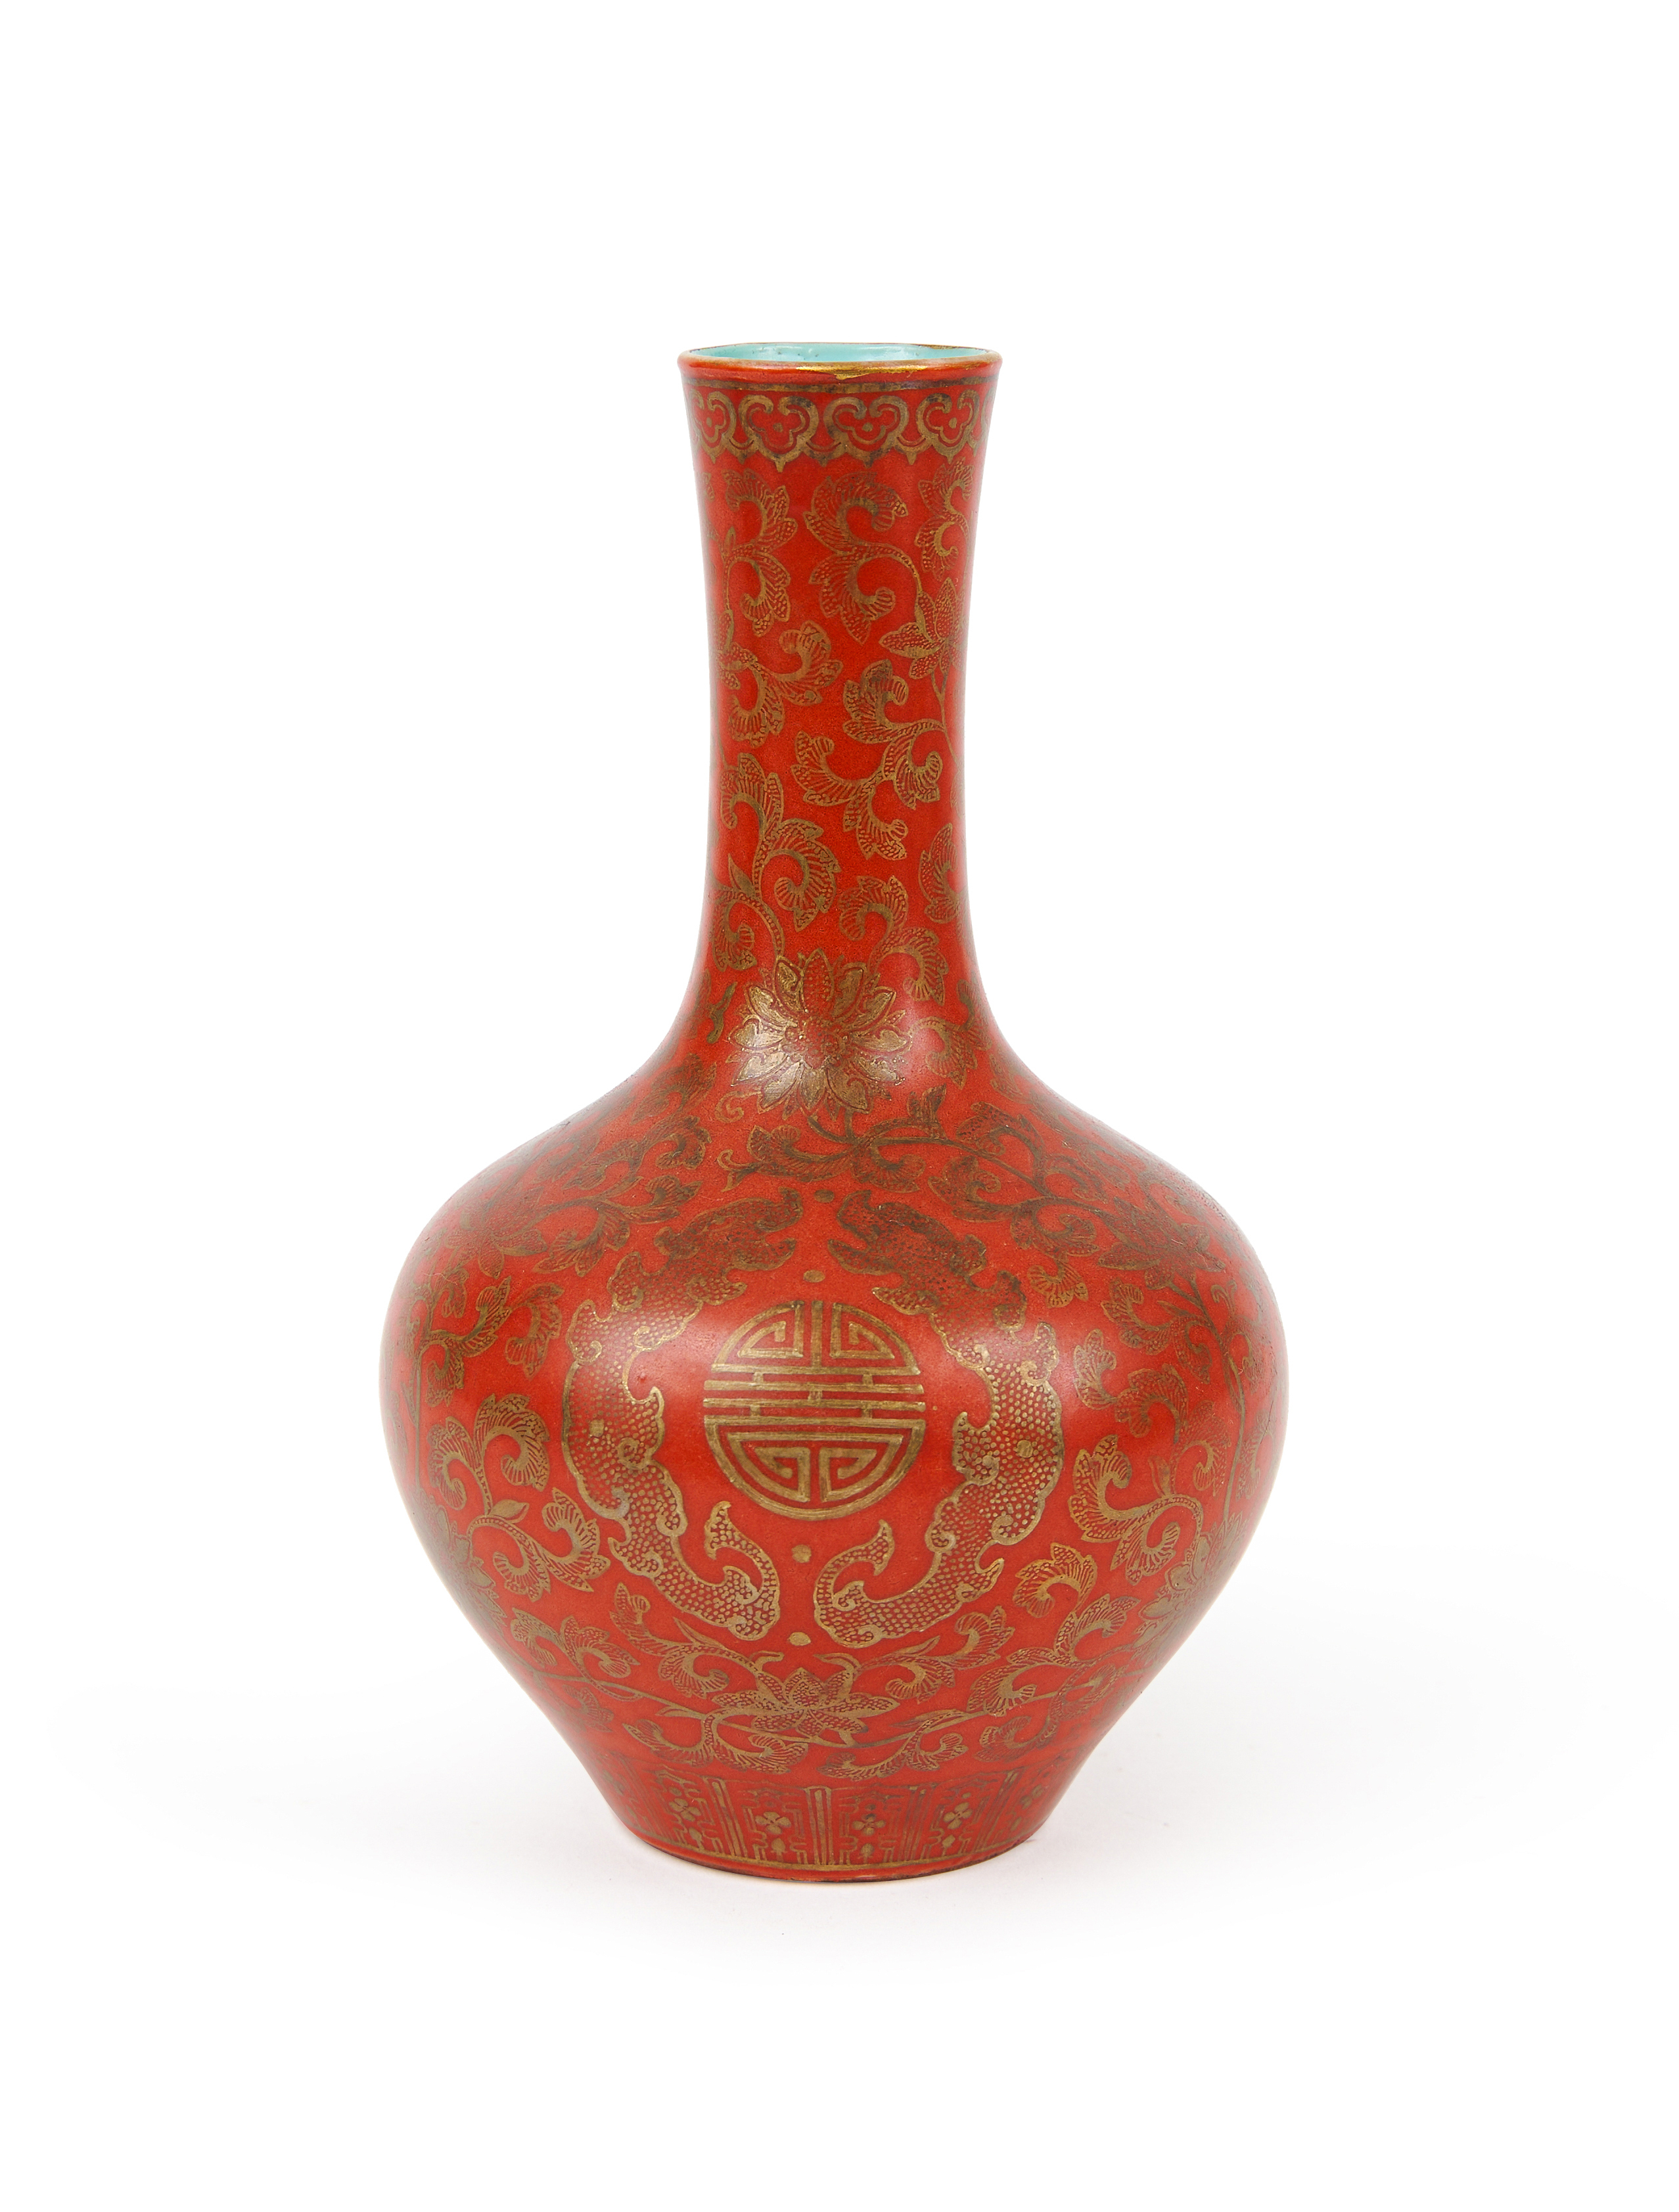 A GILT-DECORATED CORAL-GROUND BOTTLE VASE, QING DYNASTY (1644-1911)